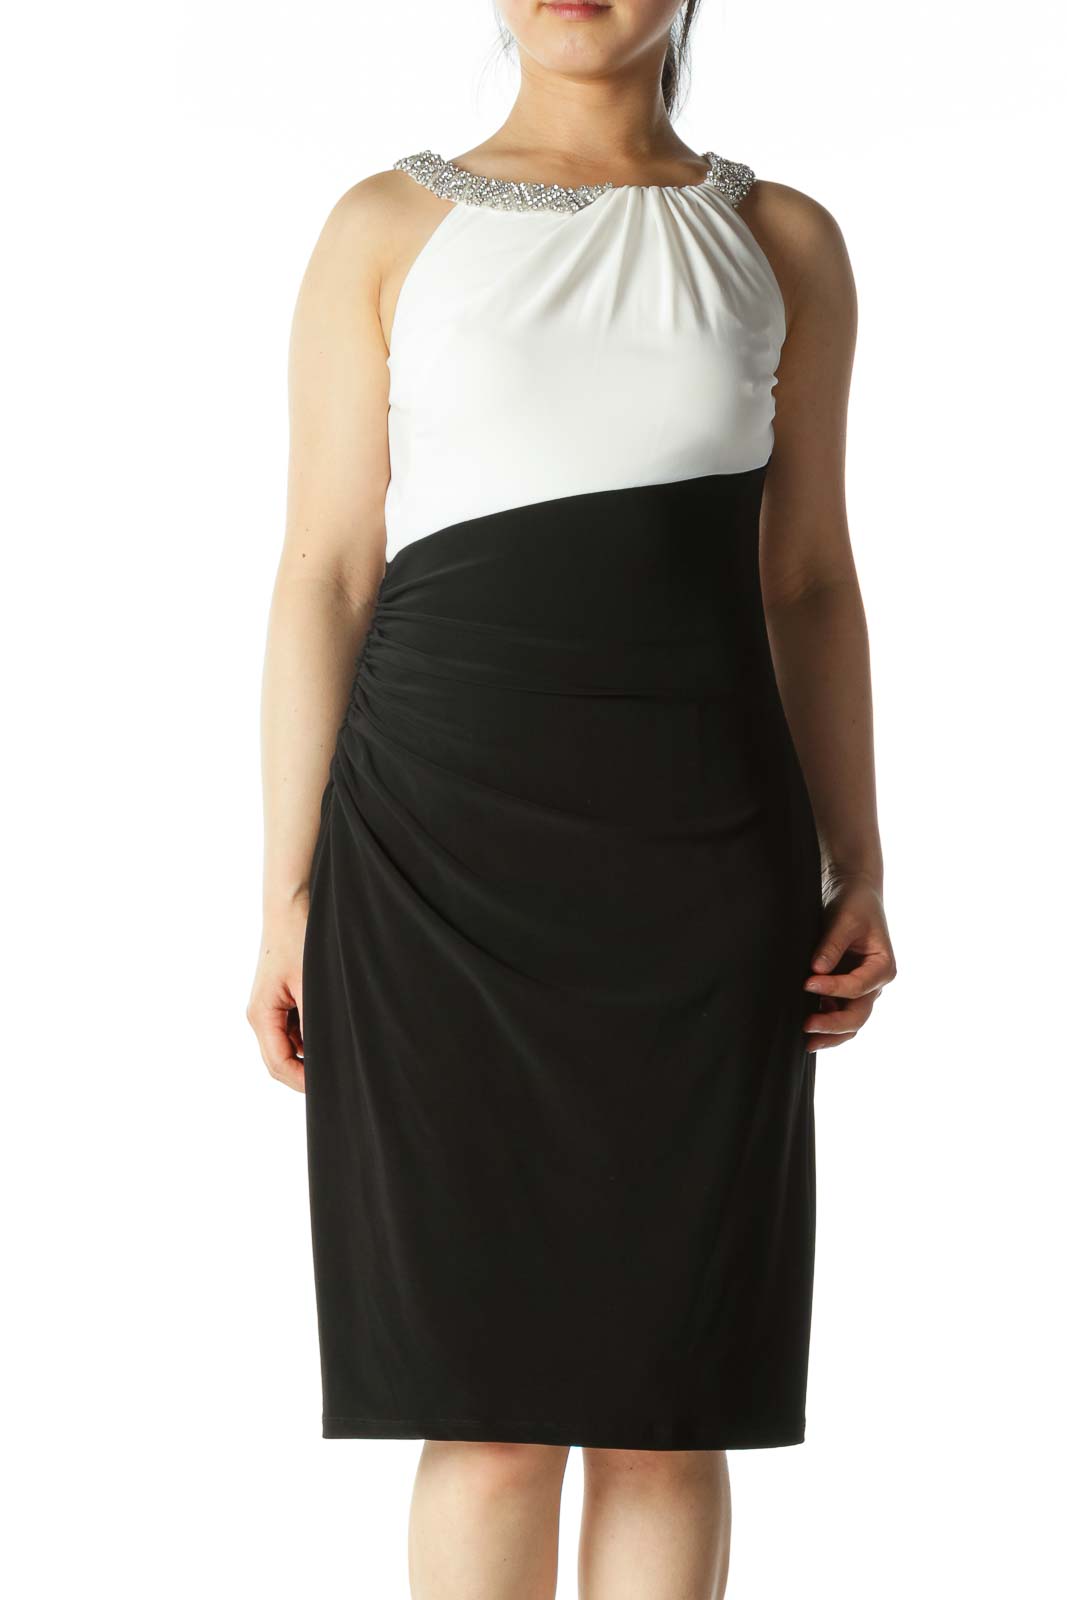 Black and White Cocktail Dress With Bejeweled Straps  Front